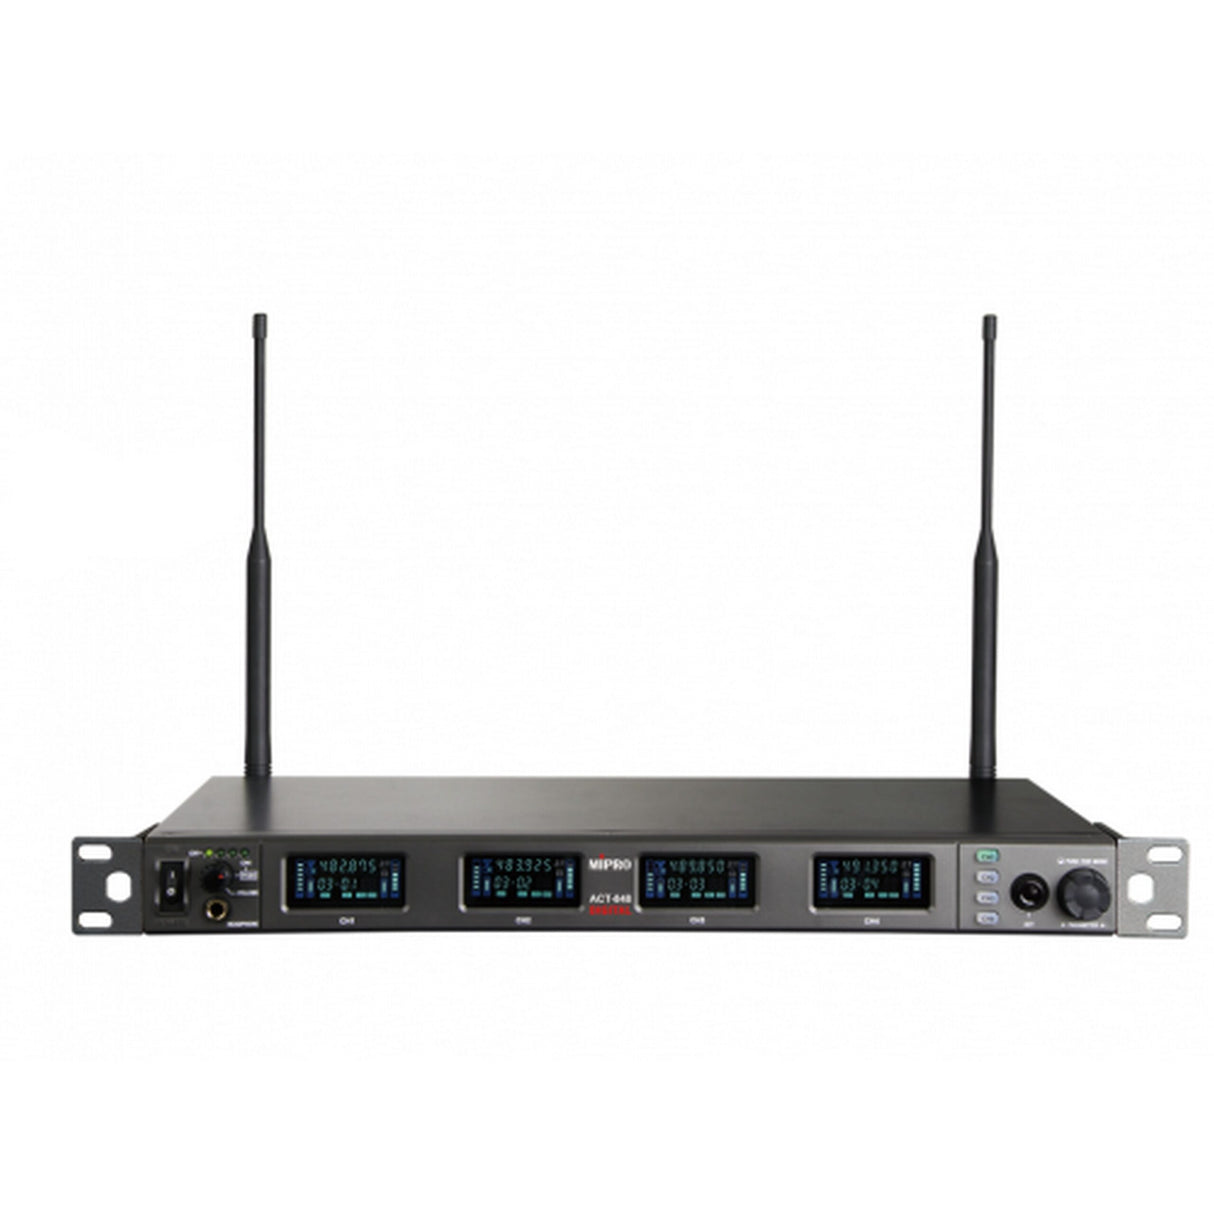 MIPRO ACT-848 1U Quad-Channel UHF Wideband Digital Receiver without Dante, 5E